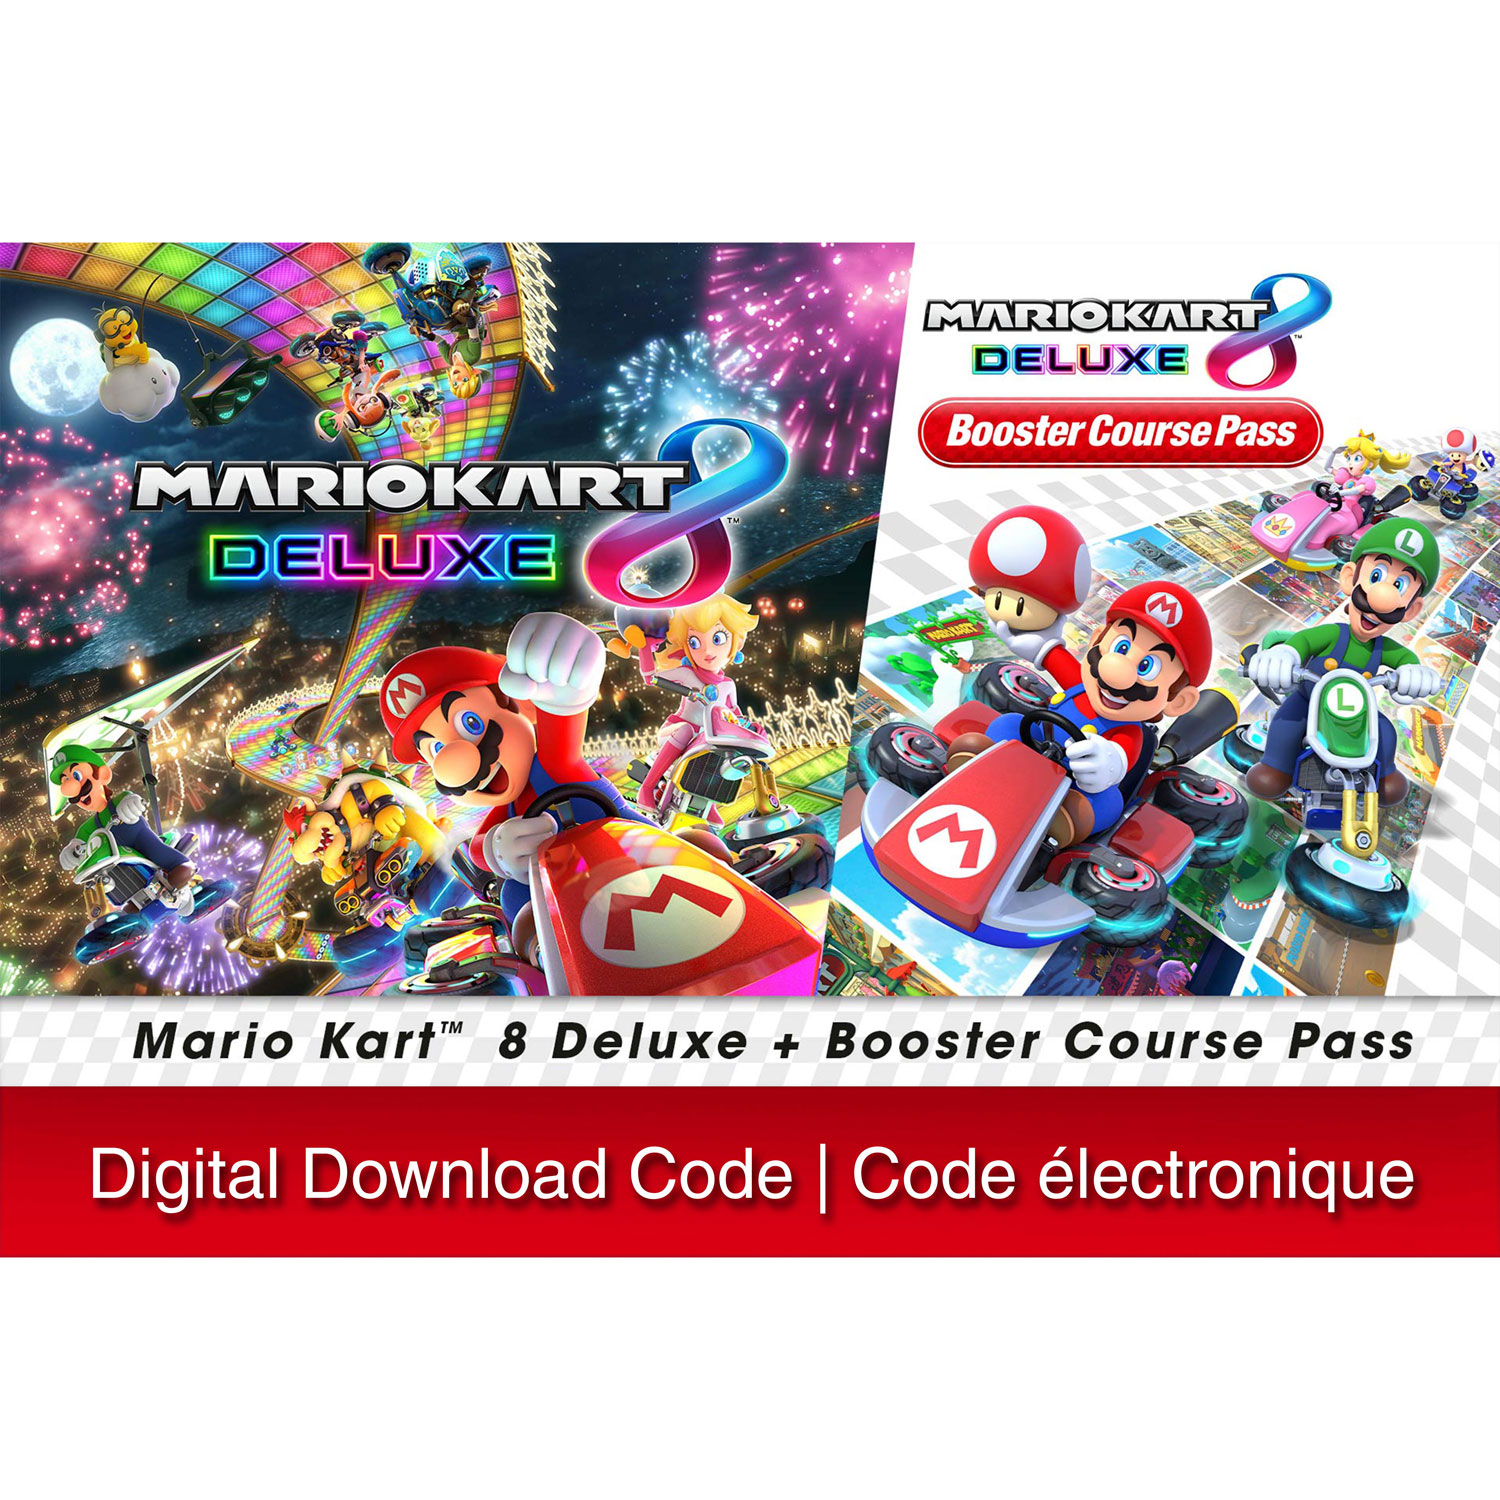 Mario Kart 8 Deluxe + Booster Course Pass Bundle (Switch) - Digital Download